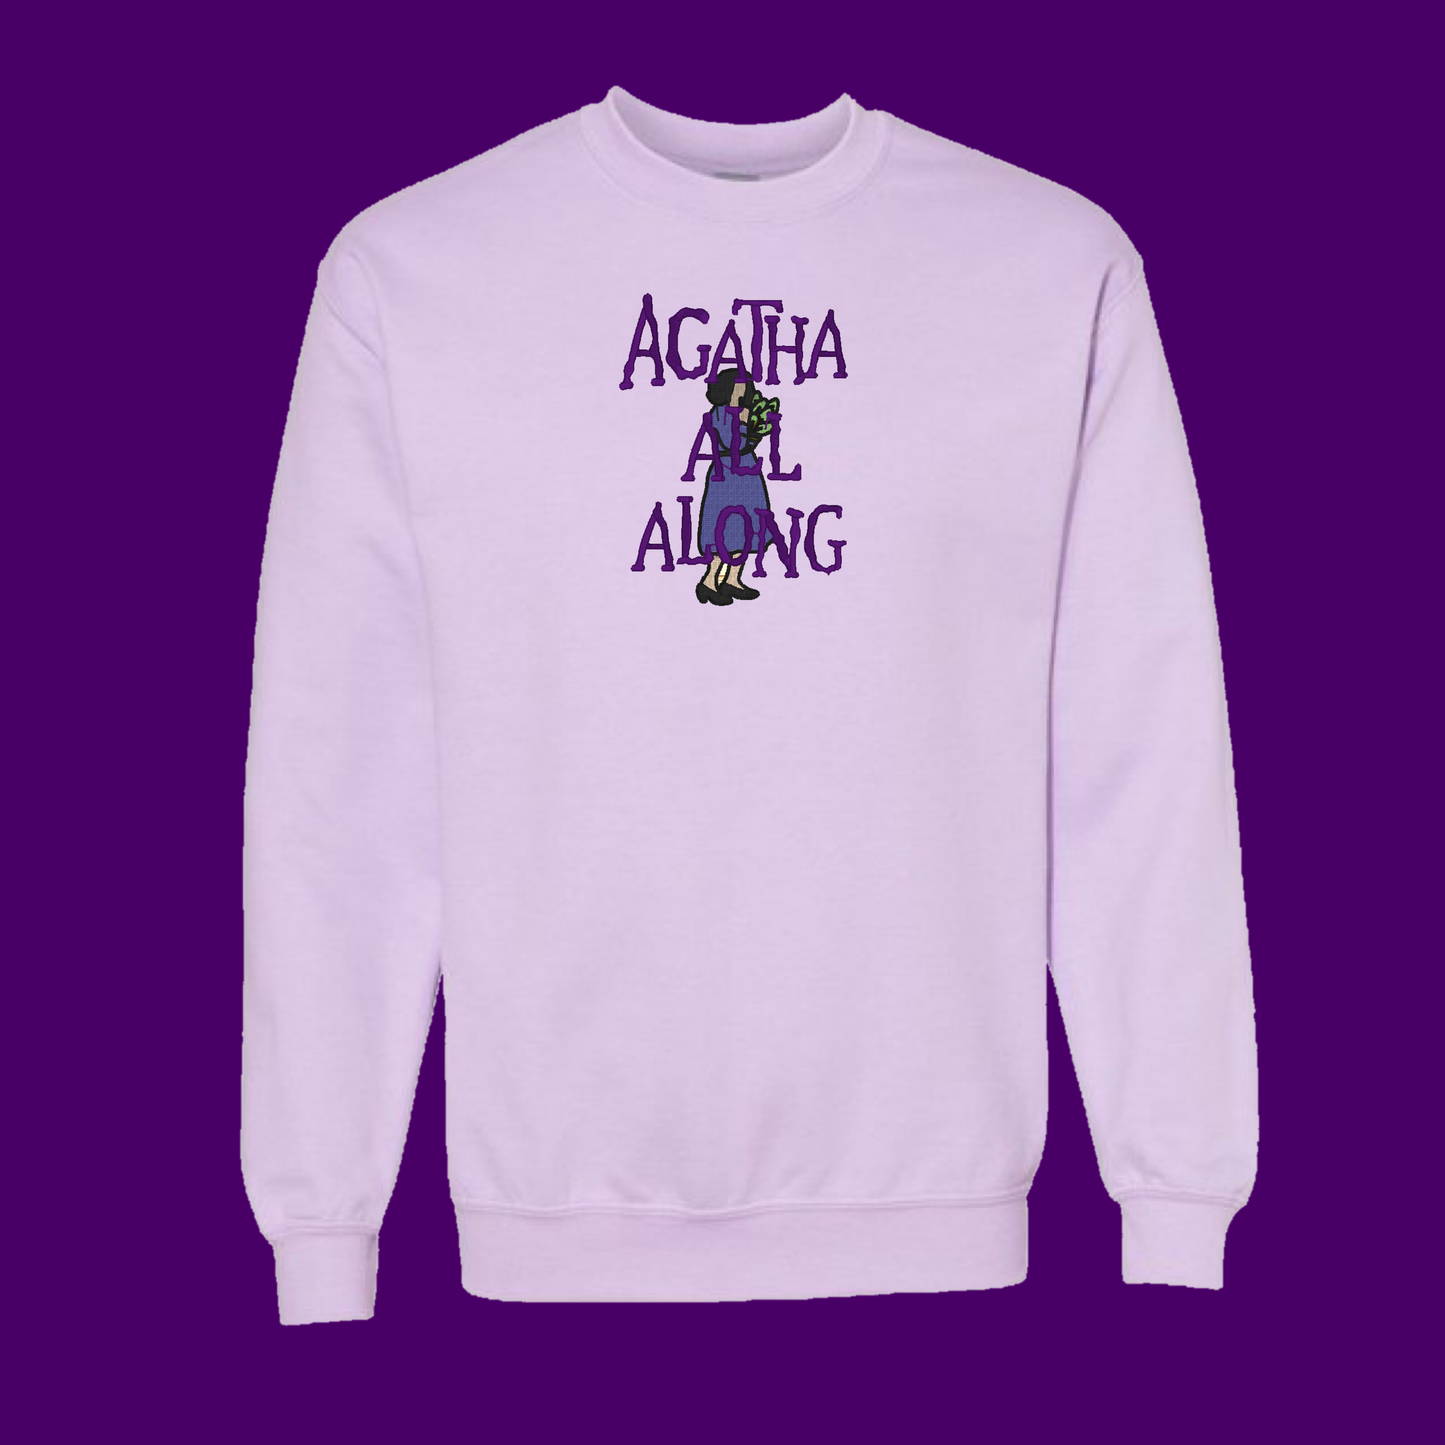 Agatha All Along embroidered pullover Sweatshirt